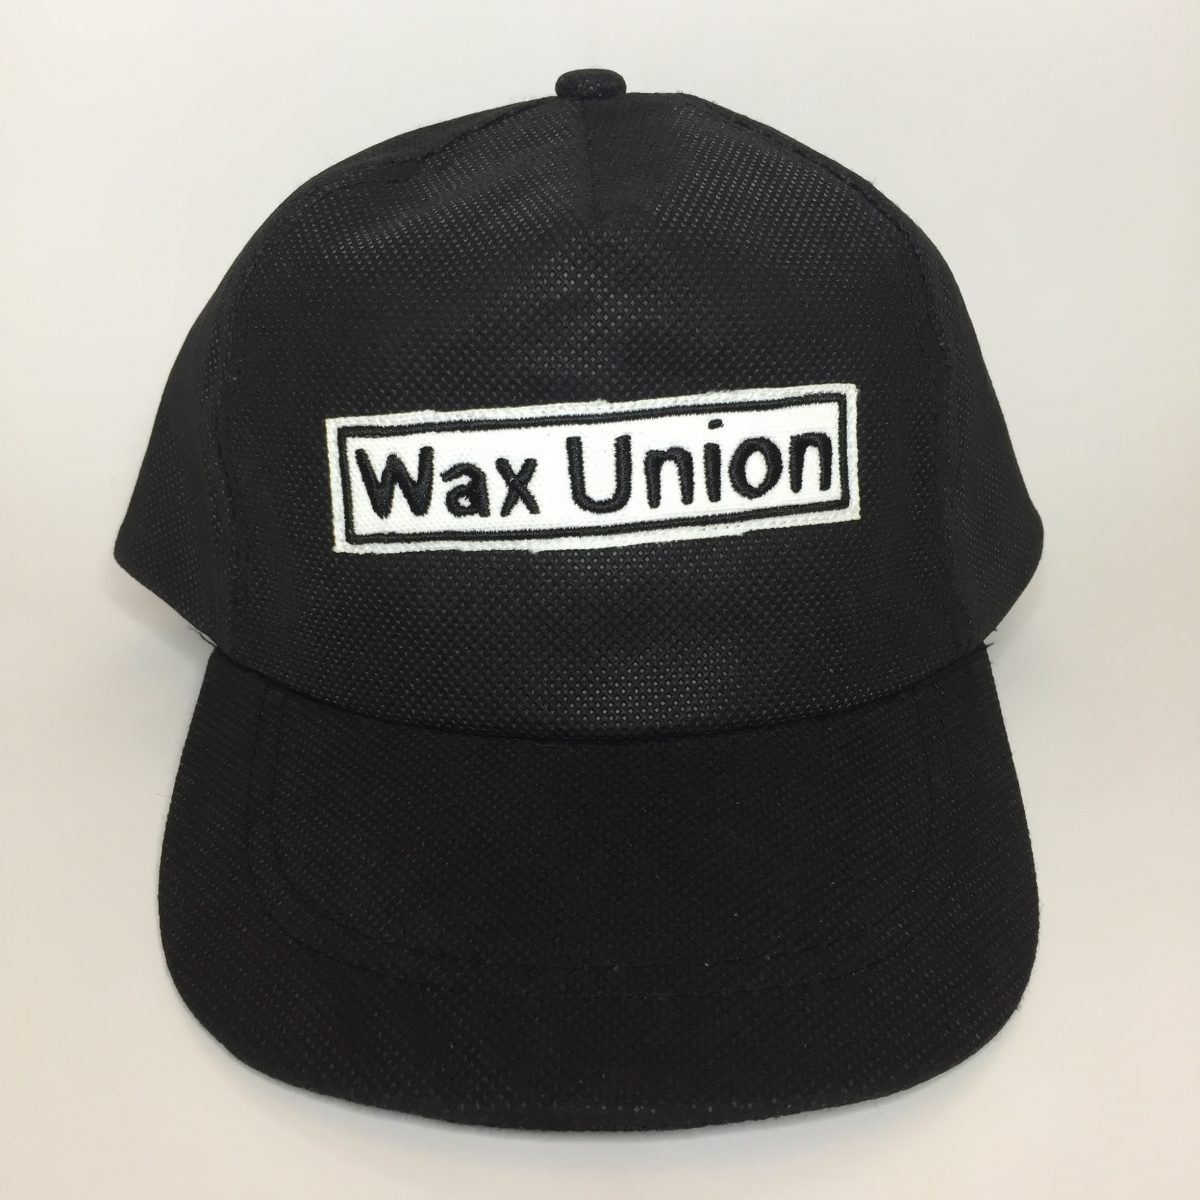 Wax Union Text Patch 5 Panel Dad Hat Front View